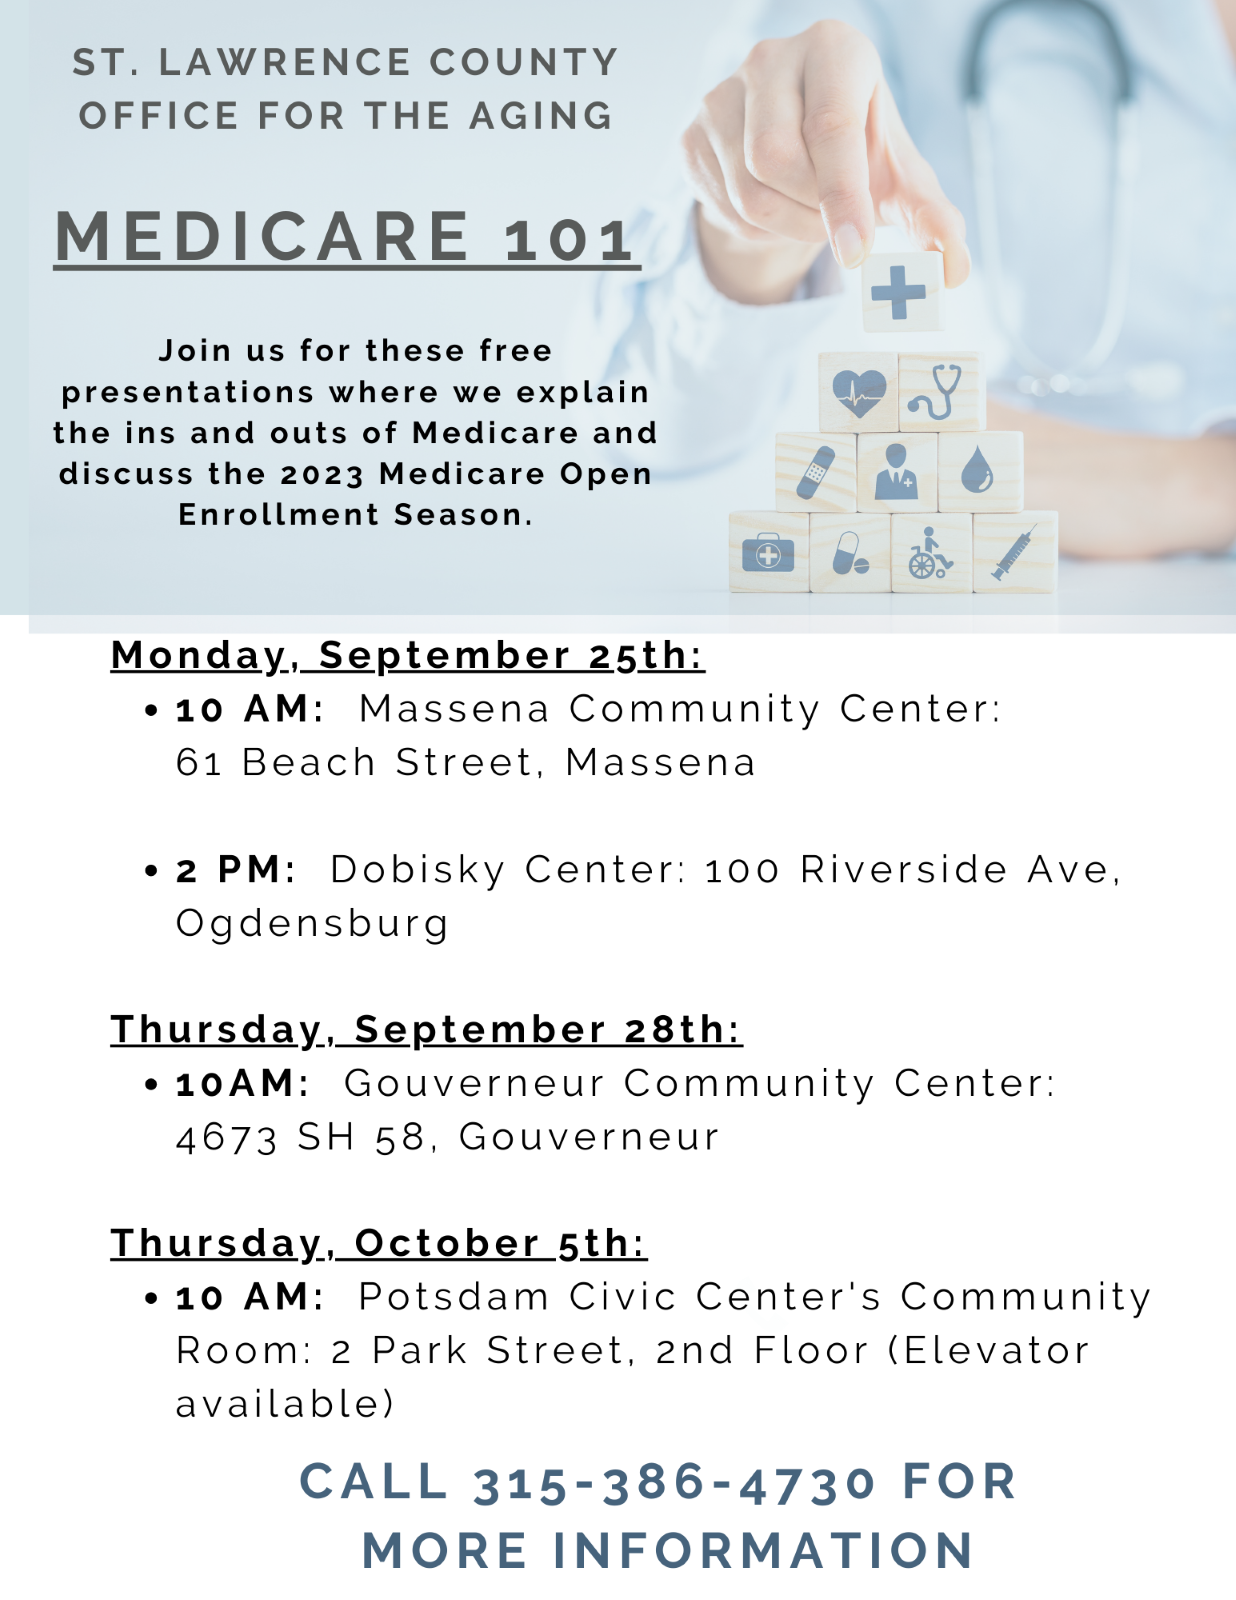 Medicare 101 Sessions